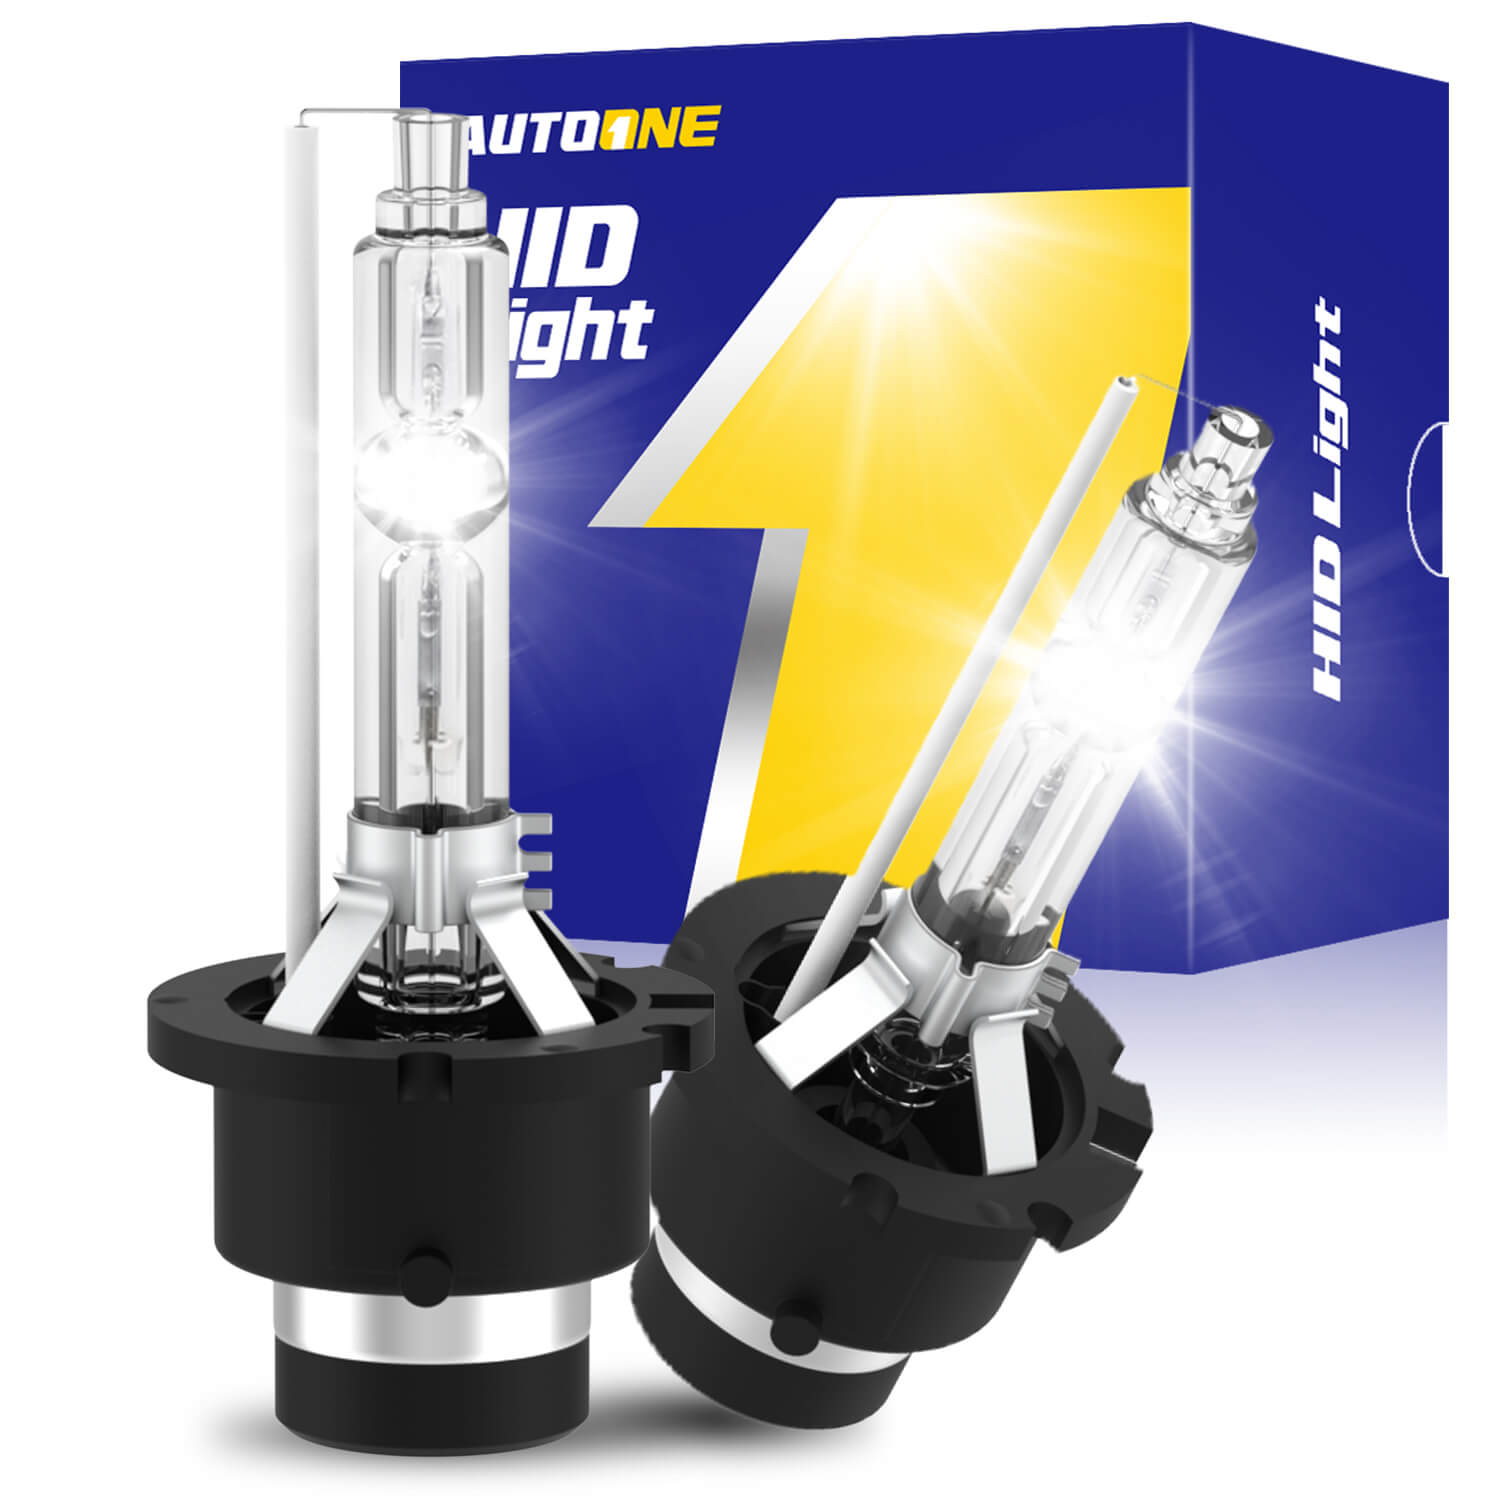 D2S HID Factory Replacement Bulbs - LED Light Street